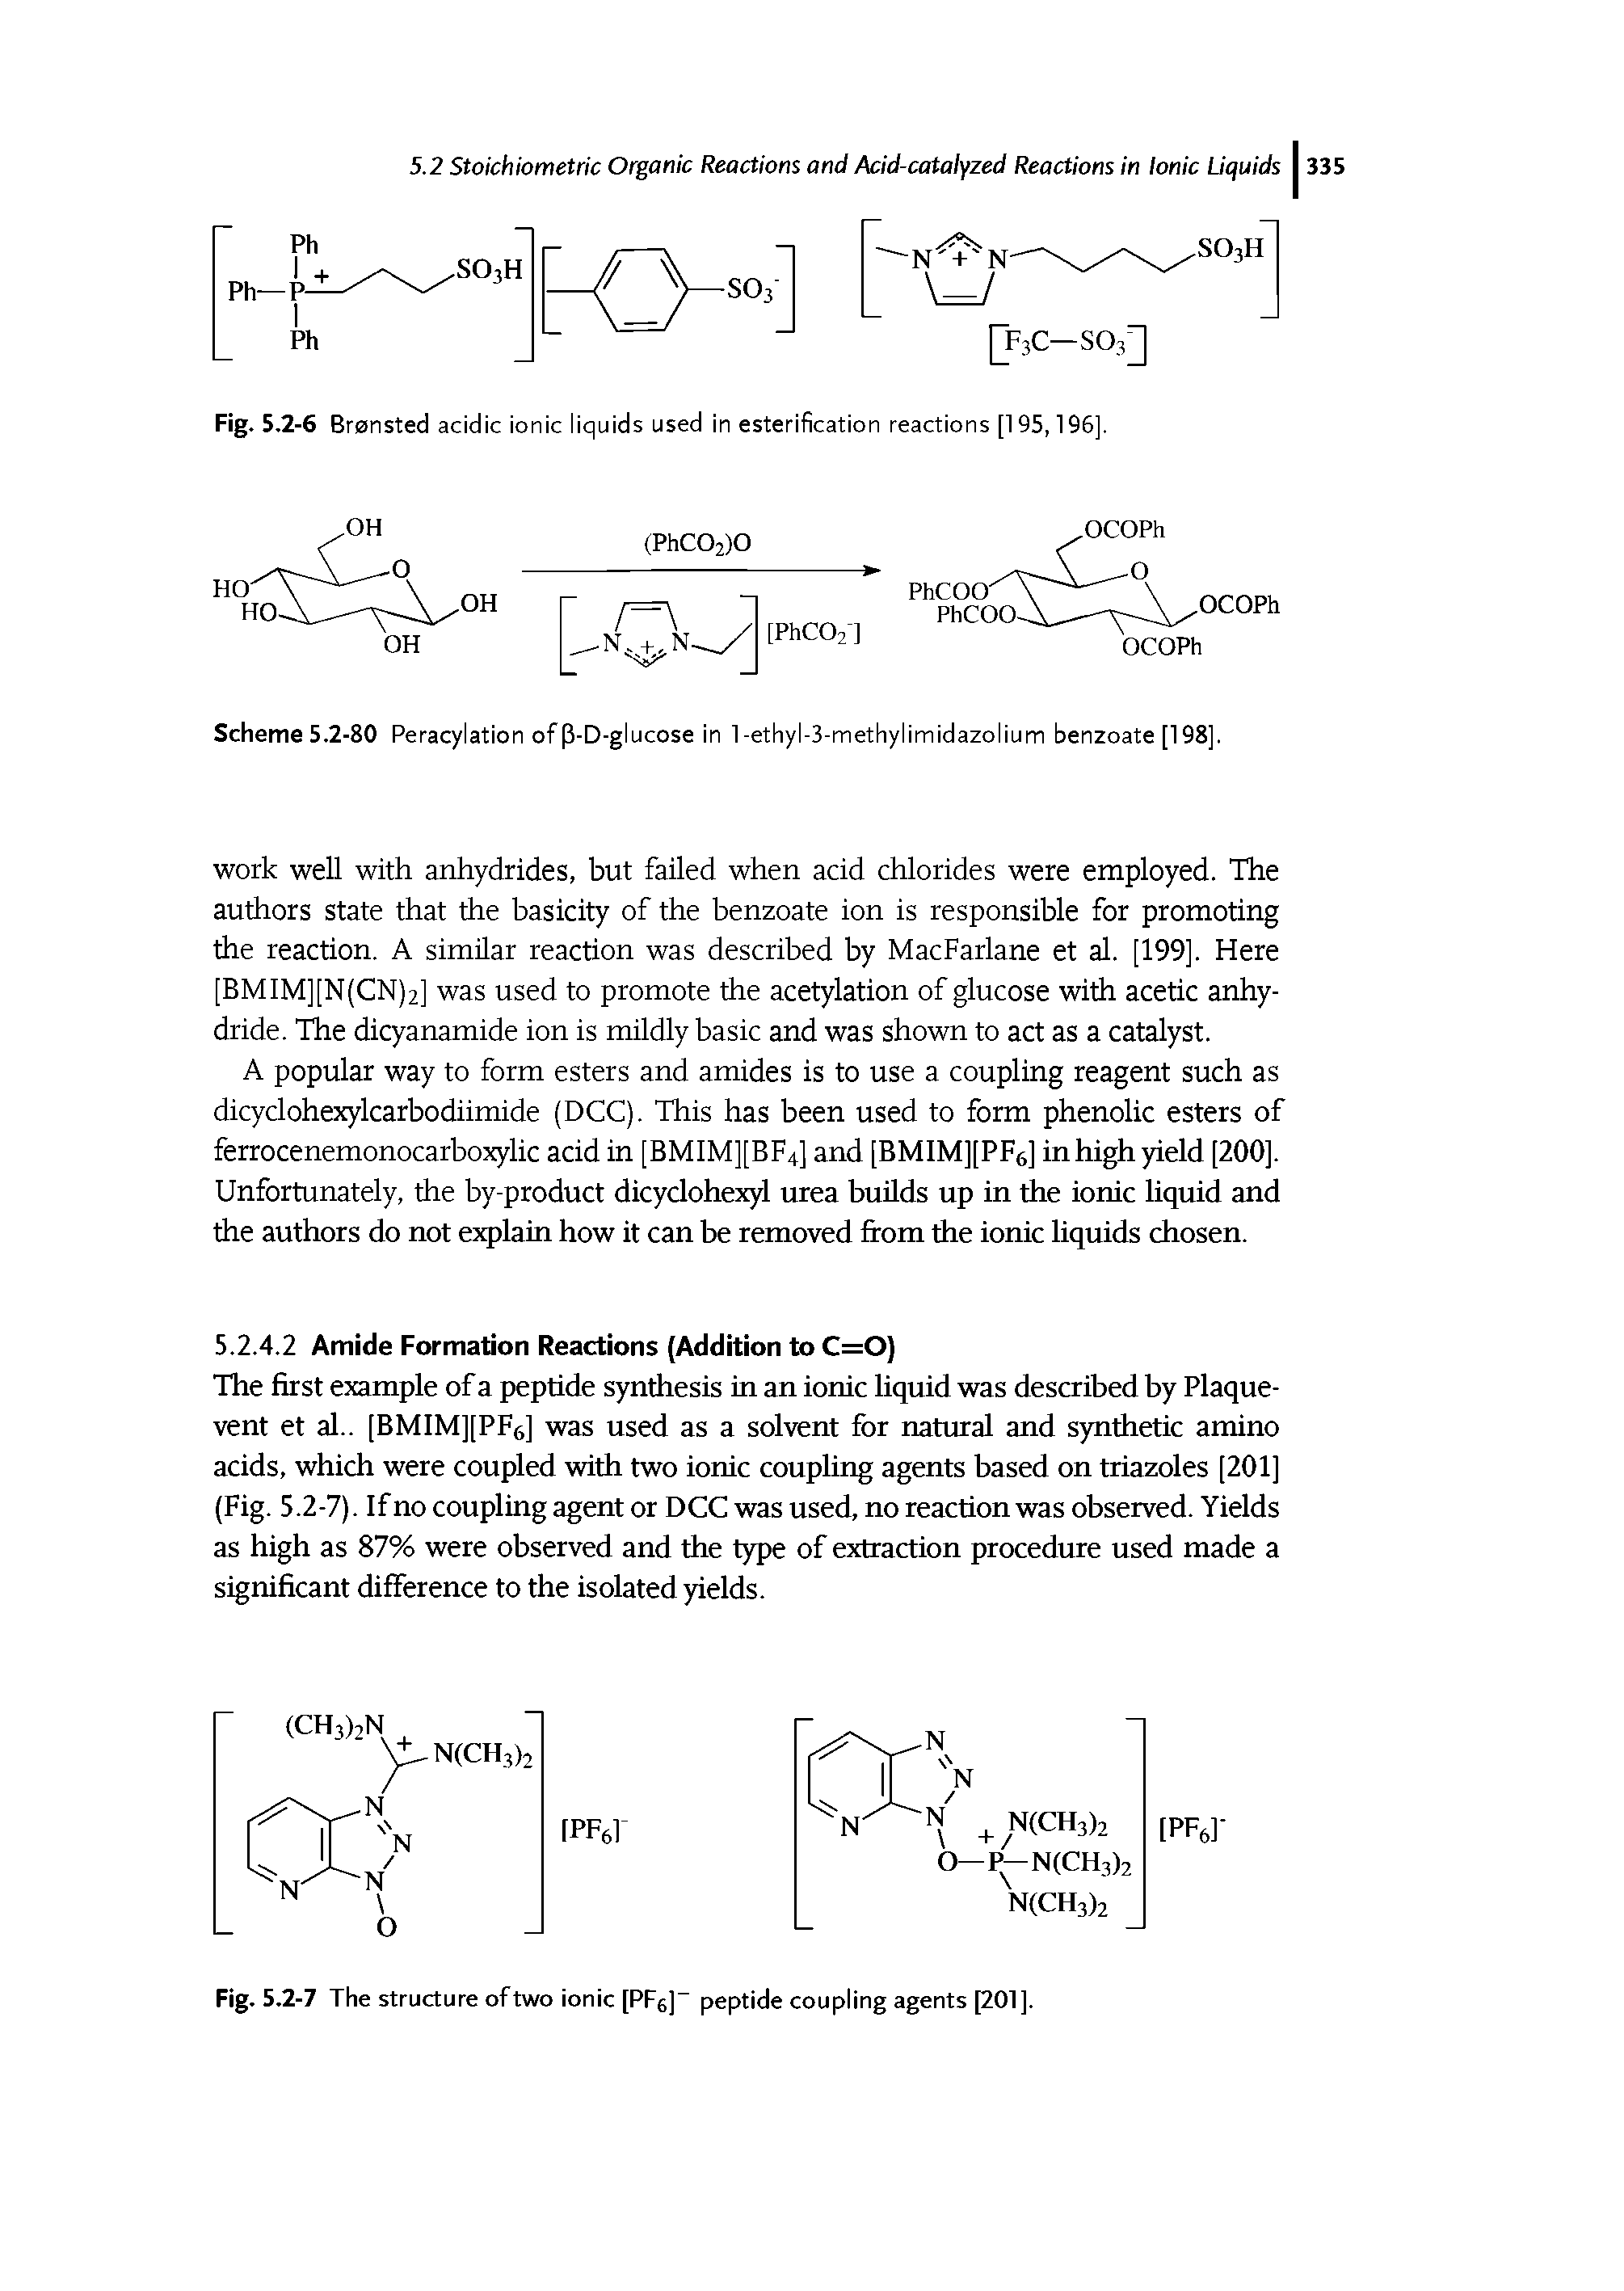 Fig. 5.2 -6 Bransted acidic ionic liquids used in esterification reactions [195,196].